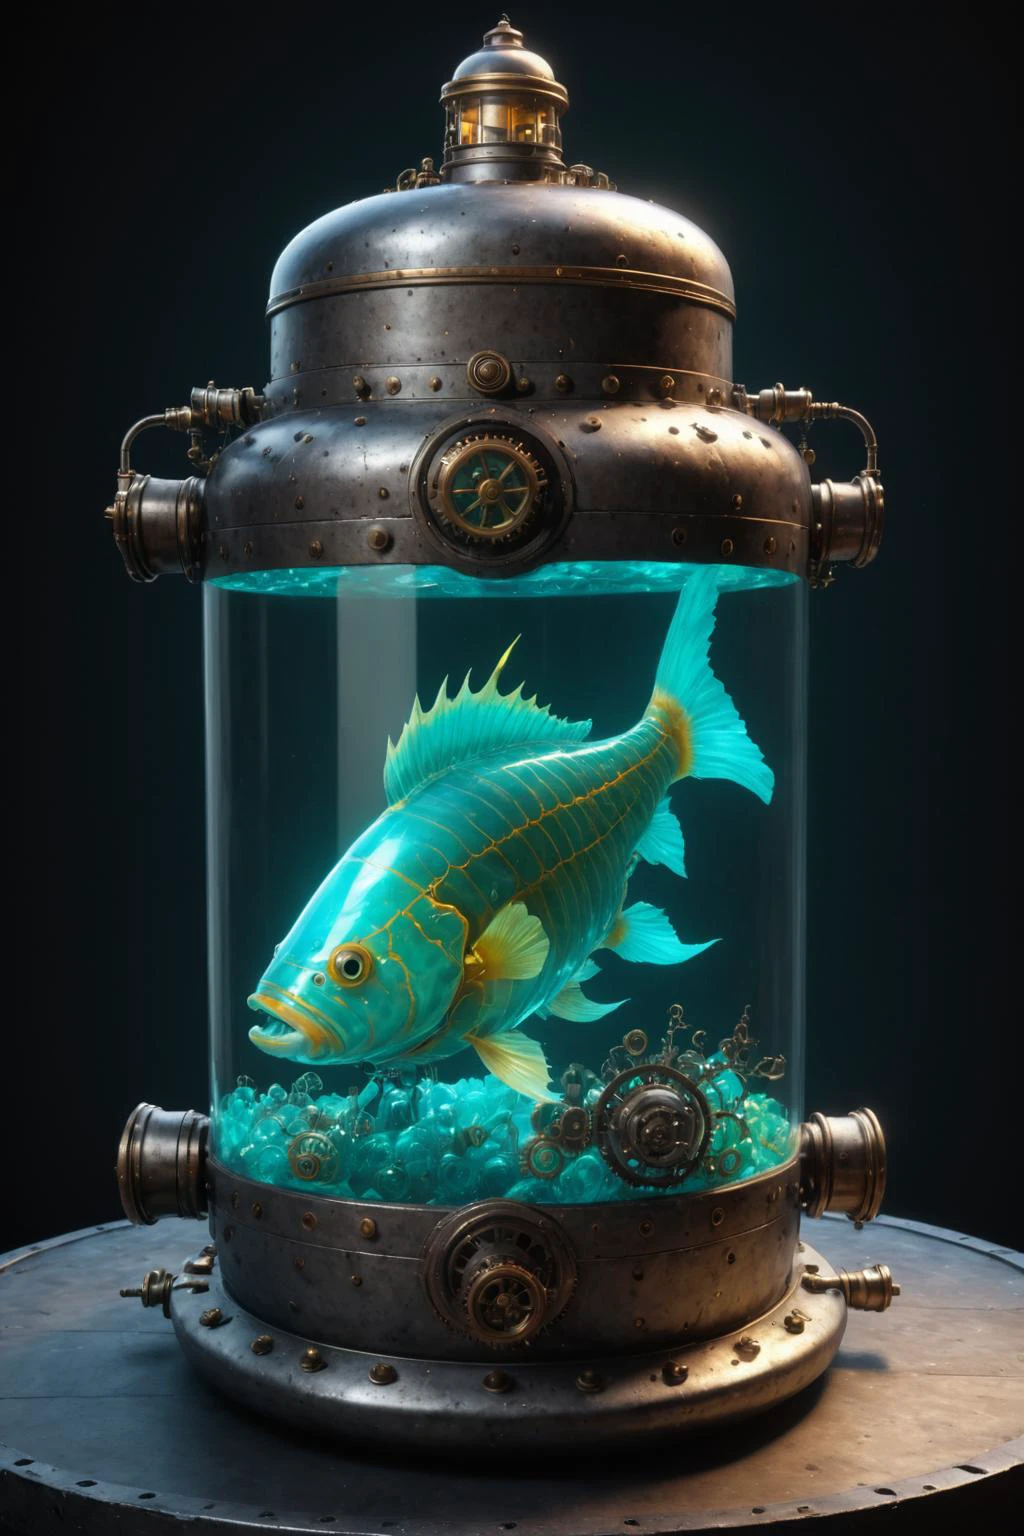 contained color, a big fish inside of a large steampunk container with (cyan  tinted glass), intricate detail 8K render overlay volume mapped seamless like a bottle by carrick mcde, marius maria hongway of high perspective using gradibular highlights + by range murade trending @skeletonfishbox sci fi concept of hyper perspective+to design a steve thome volume hooded atmosphere material unreal engine lense stylize pop-collage painterly fluid design organic material minimalist h id # vttf 5